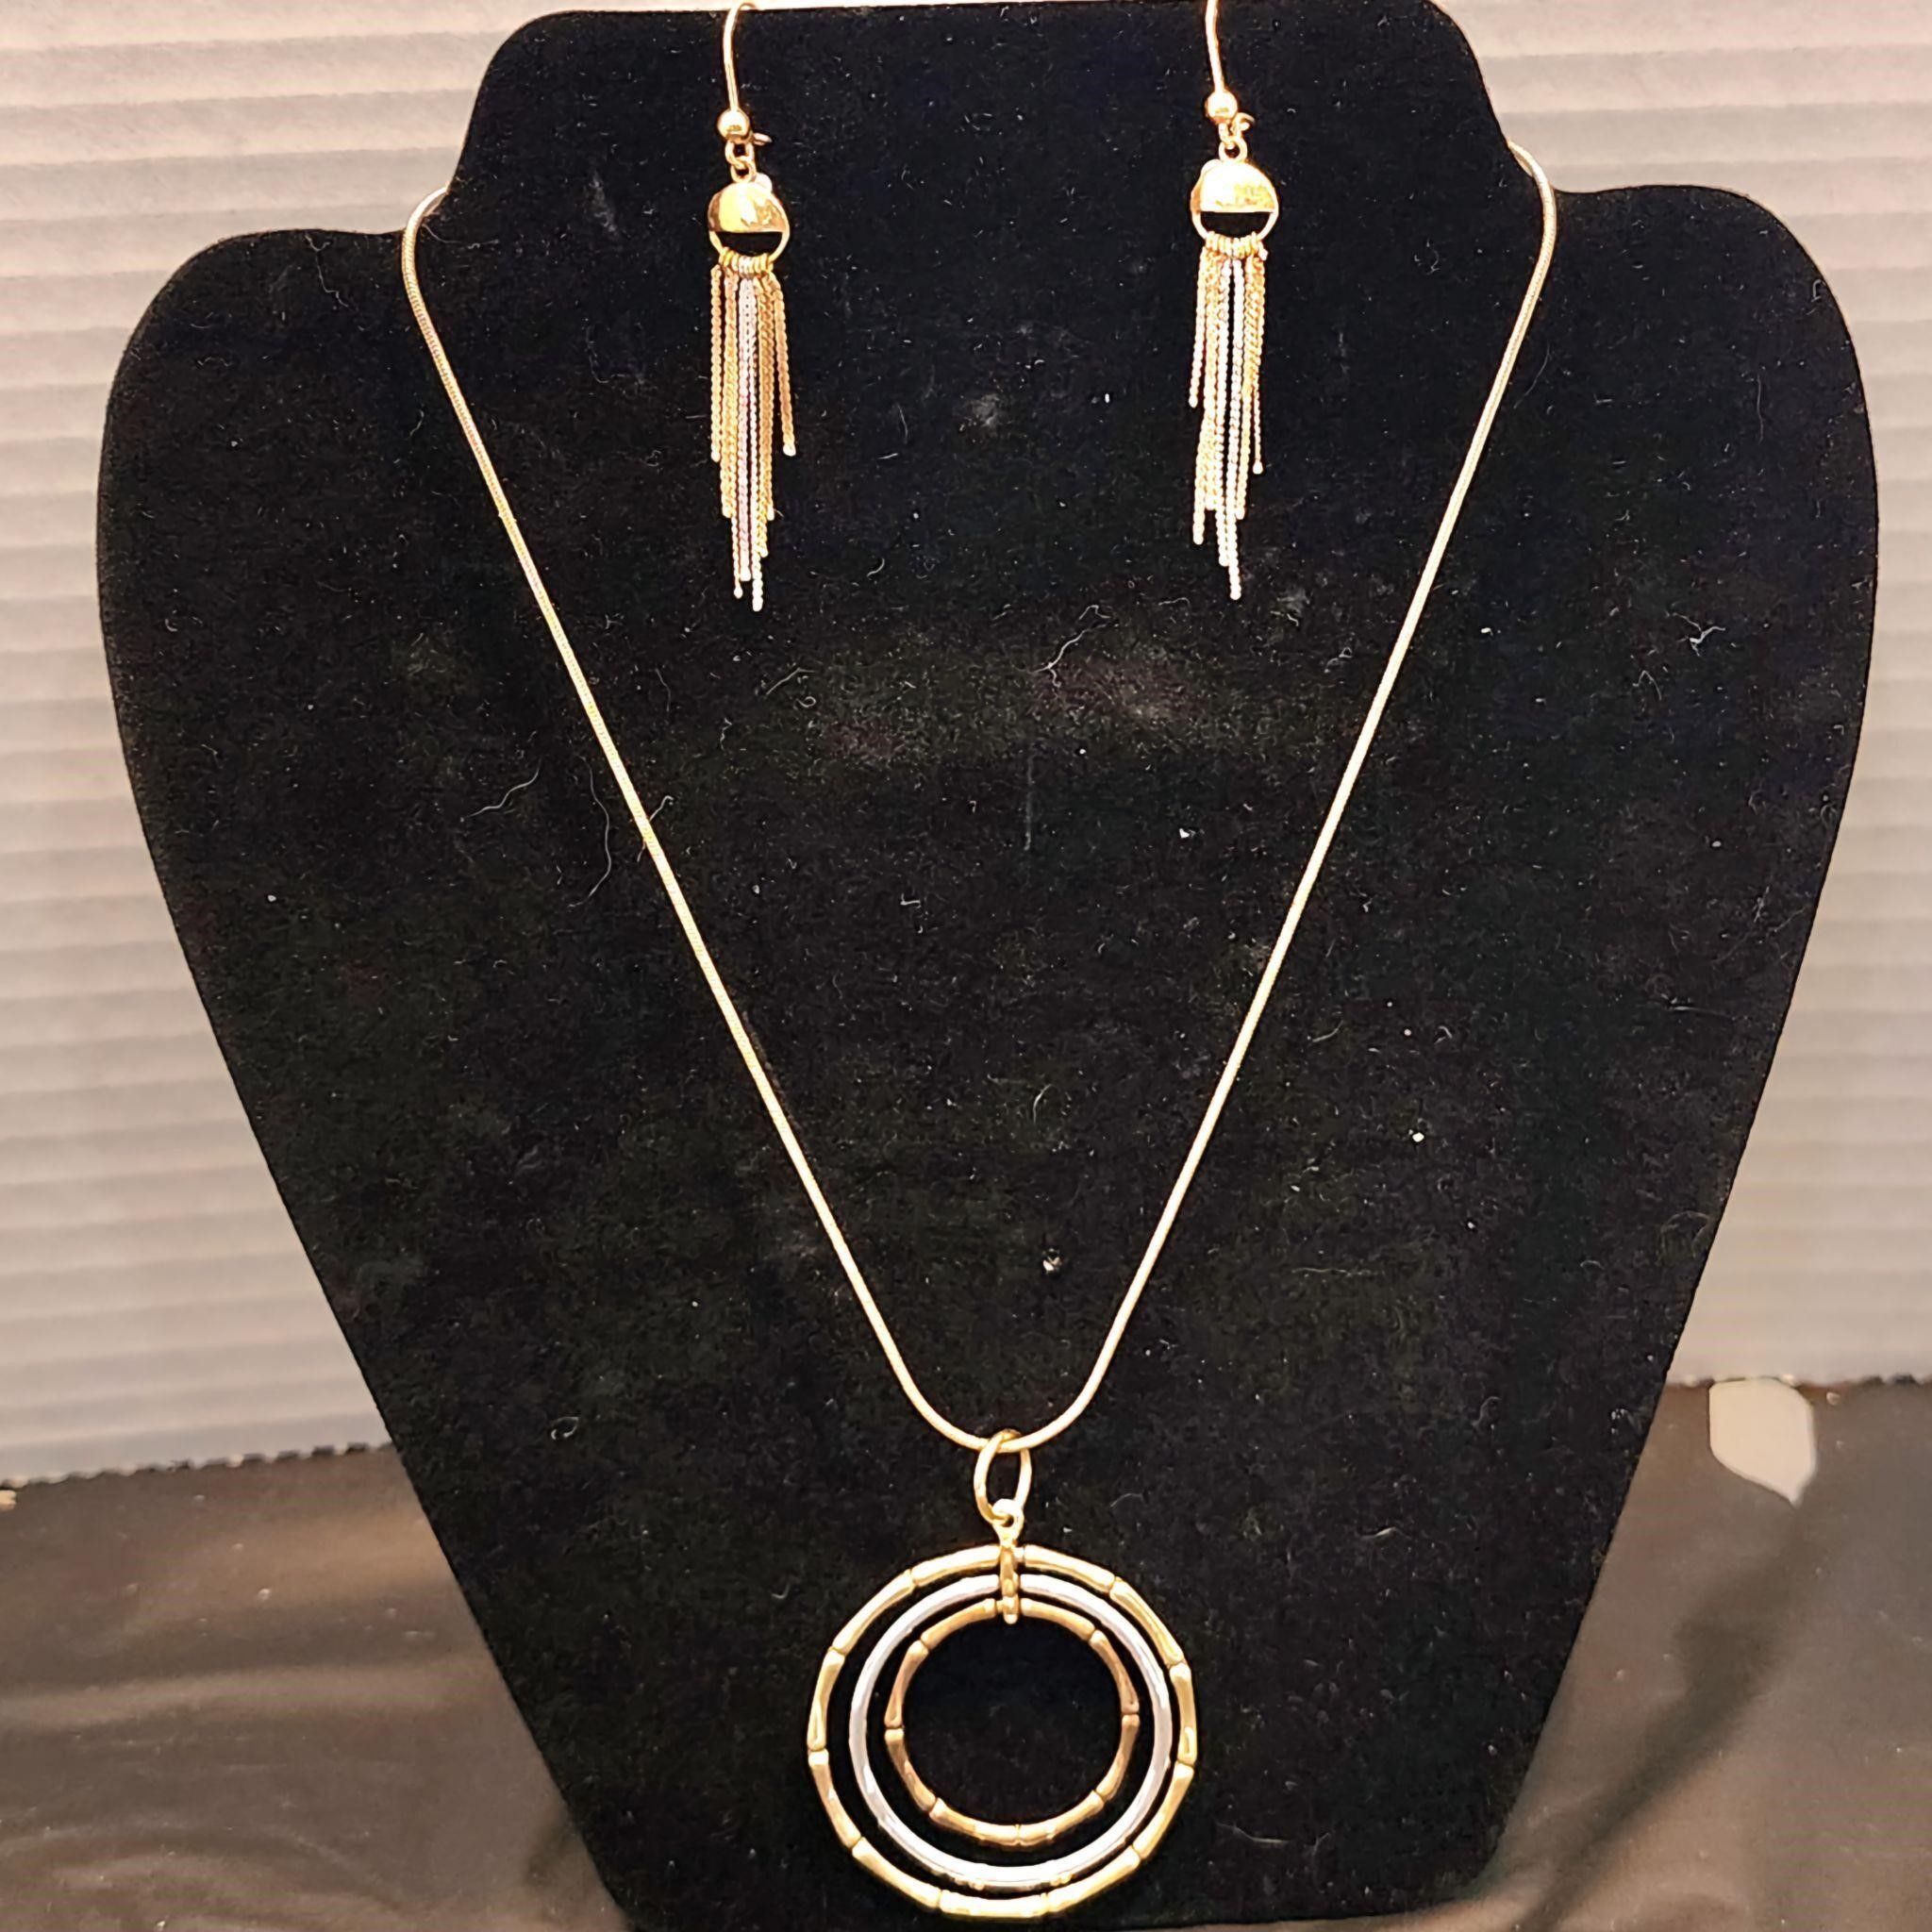 2 pc Tritone Necklace & earring set